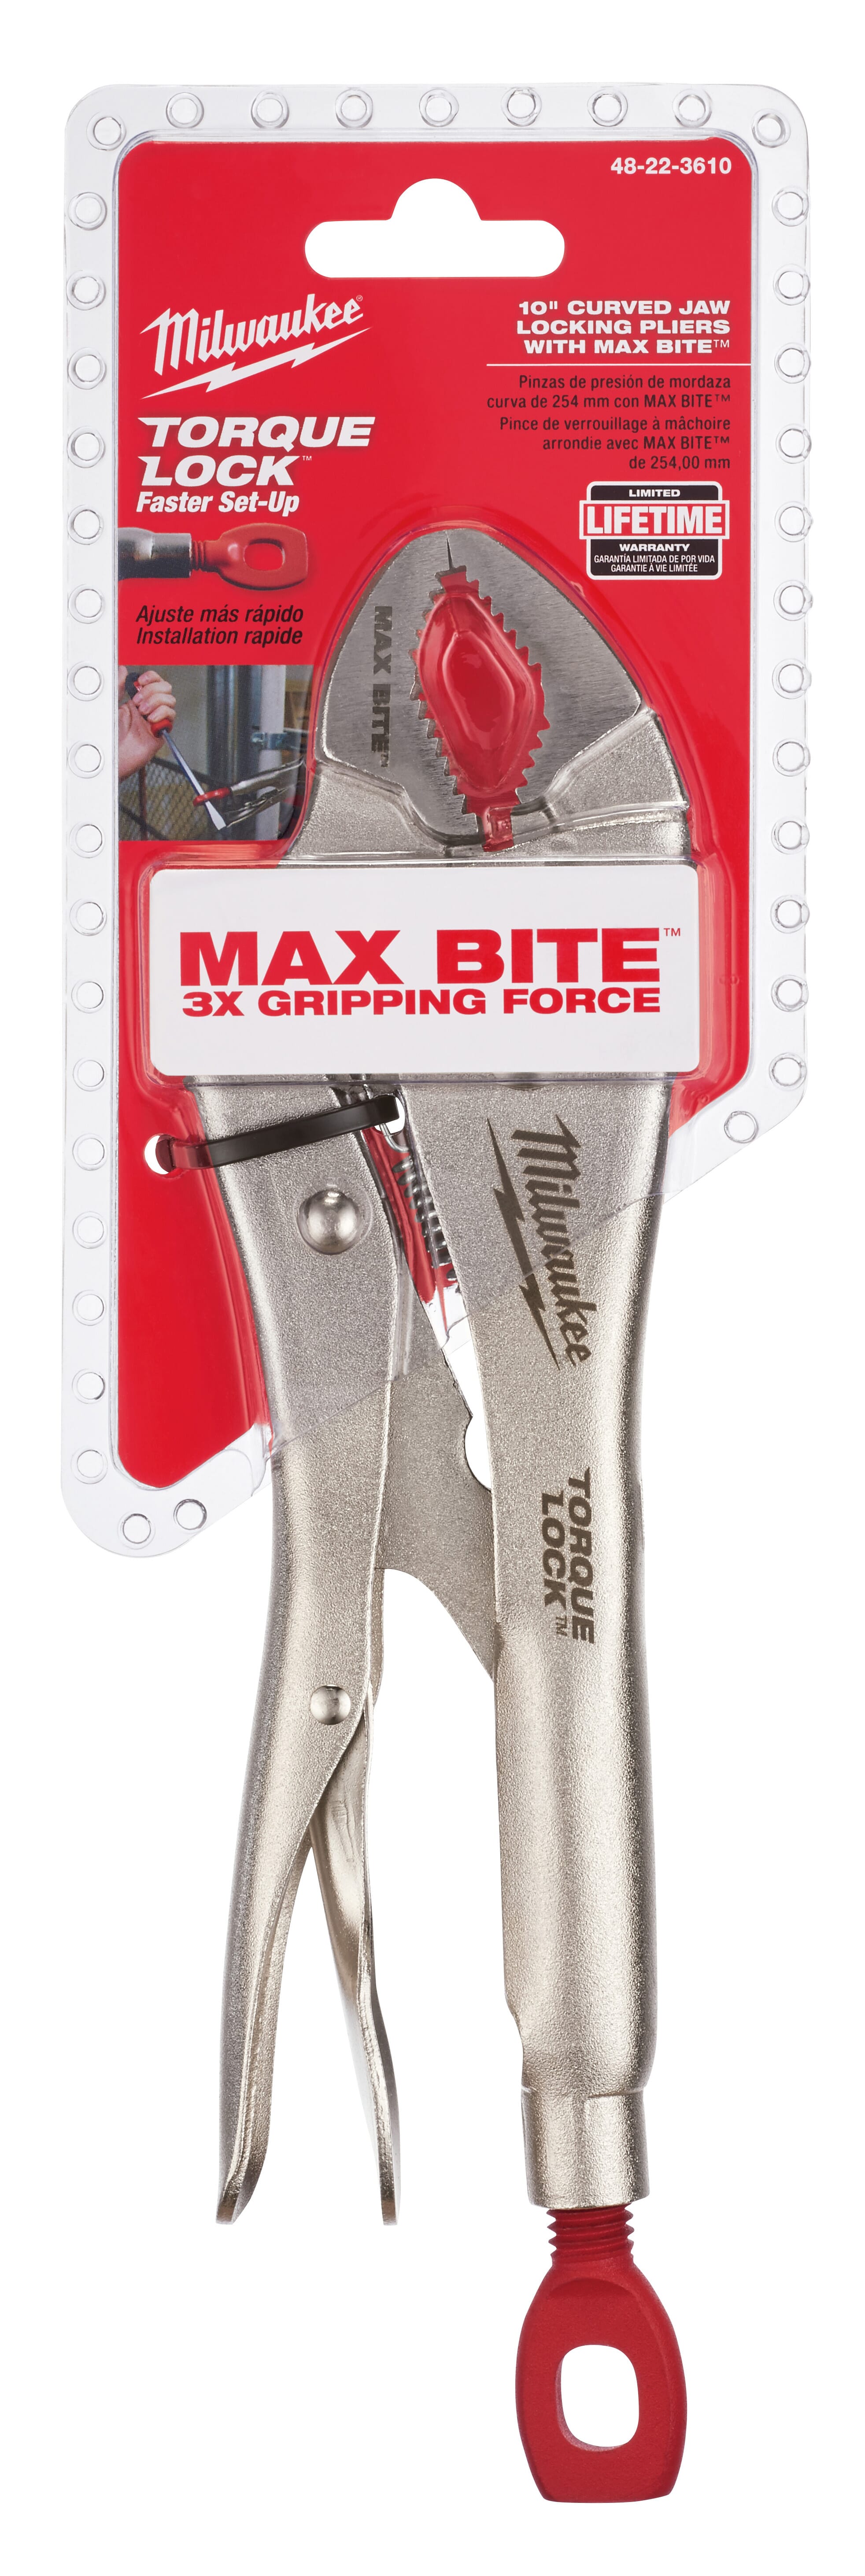 Milwaukee® TORQUE LOCK™ MAXBITE™ 48-22-3610 1-Handed Lever Standard Locking Plier, 1-7/8 in Nominal, 1-1/2 in L x 19/32 in W x 19/32 in THK Alloy Steel Curved Jaw, 10 in OAL, ASME Specified